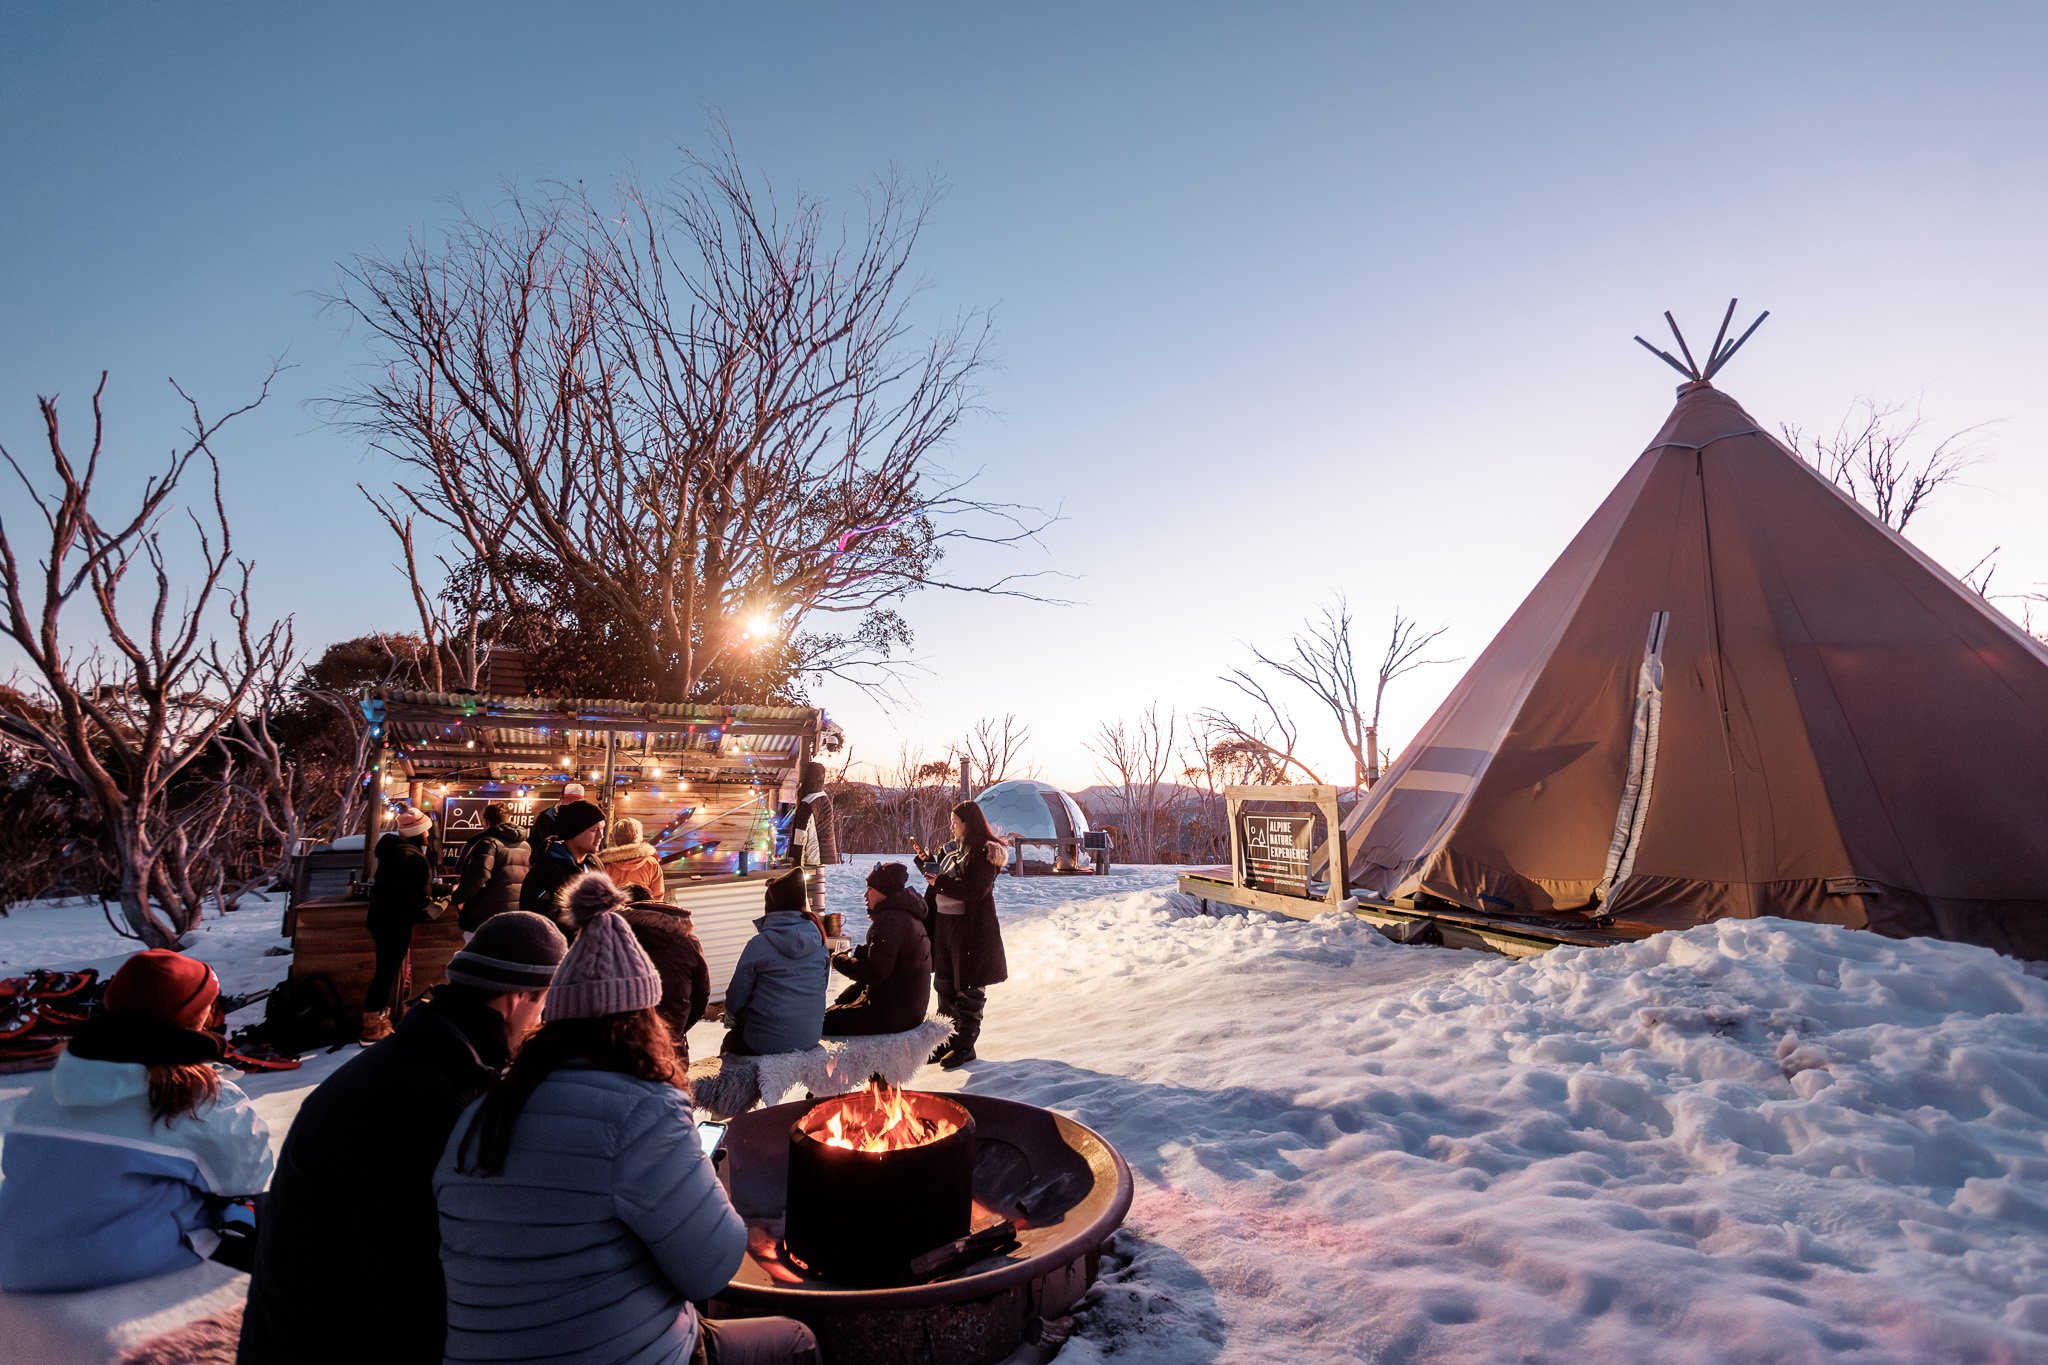 Have you booked your stay at @alpine_nature_experience yet? Snow, mulled wine by the fire, fondue in a teepee and sleeping in a dome under the stars! What's not to love?!